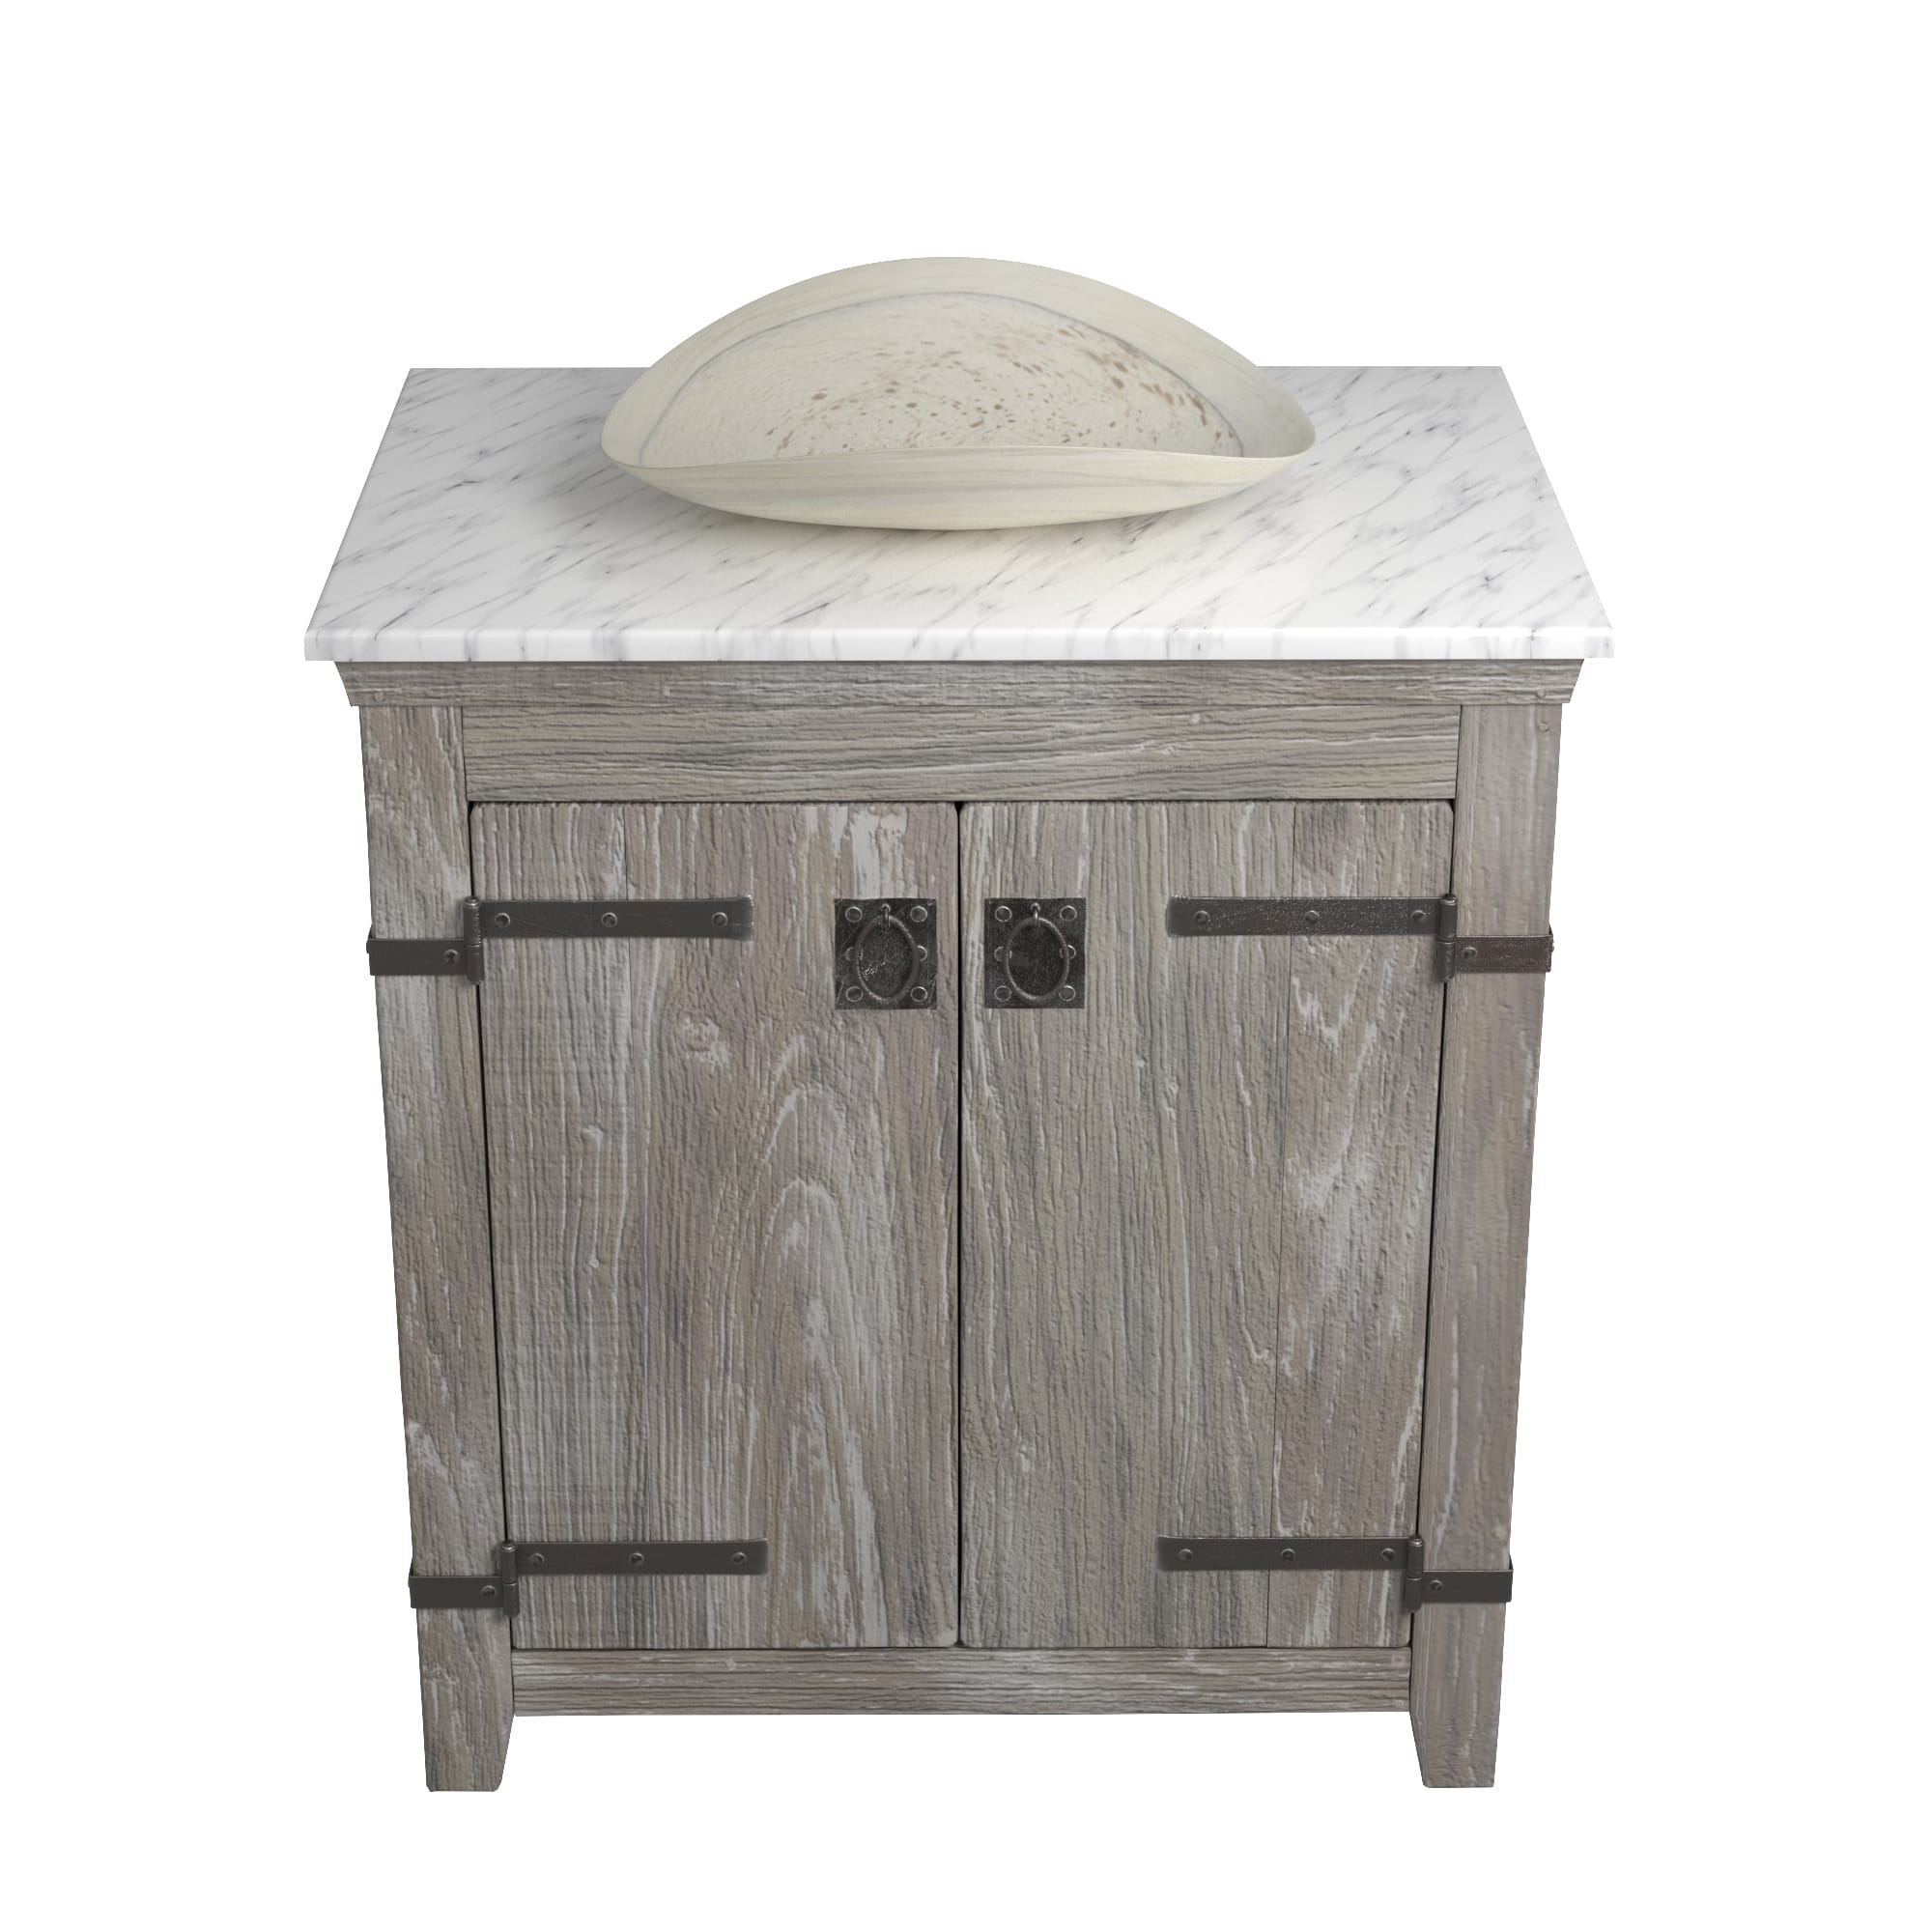 Native Trails 30" Americana Vanity in Driftwood with Carrara Marble Top and Sorrento in Beachcomber, No Faucet Hole, BND30-VB-CT-MG-112